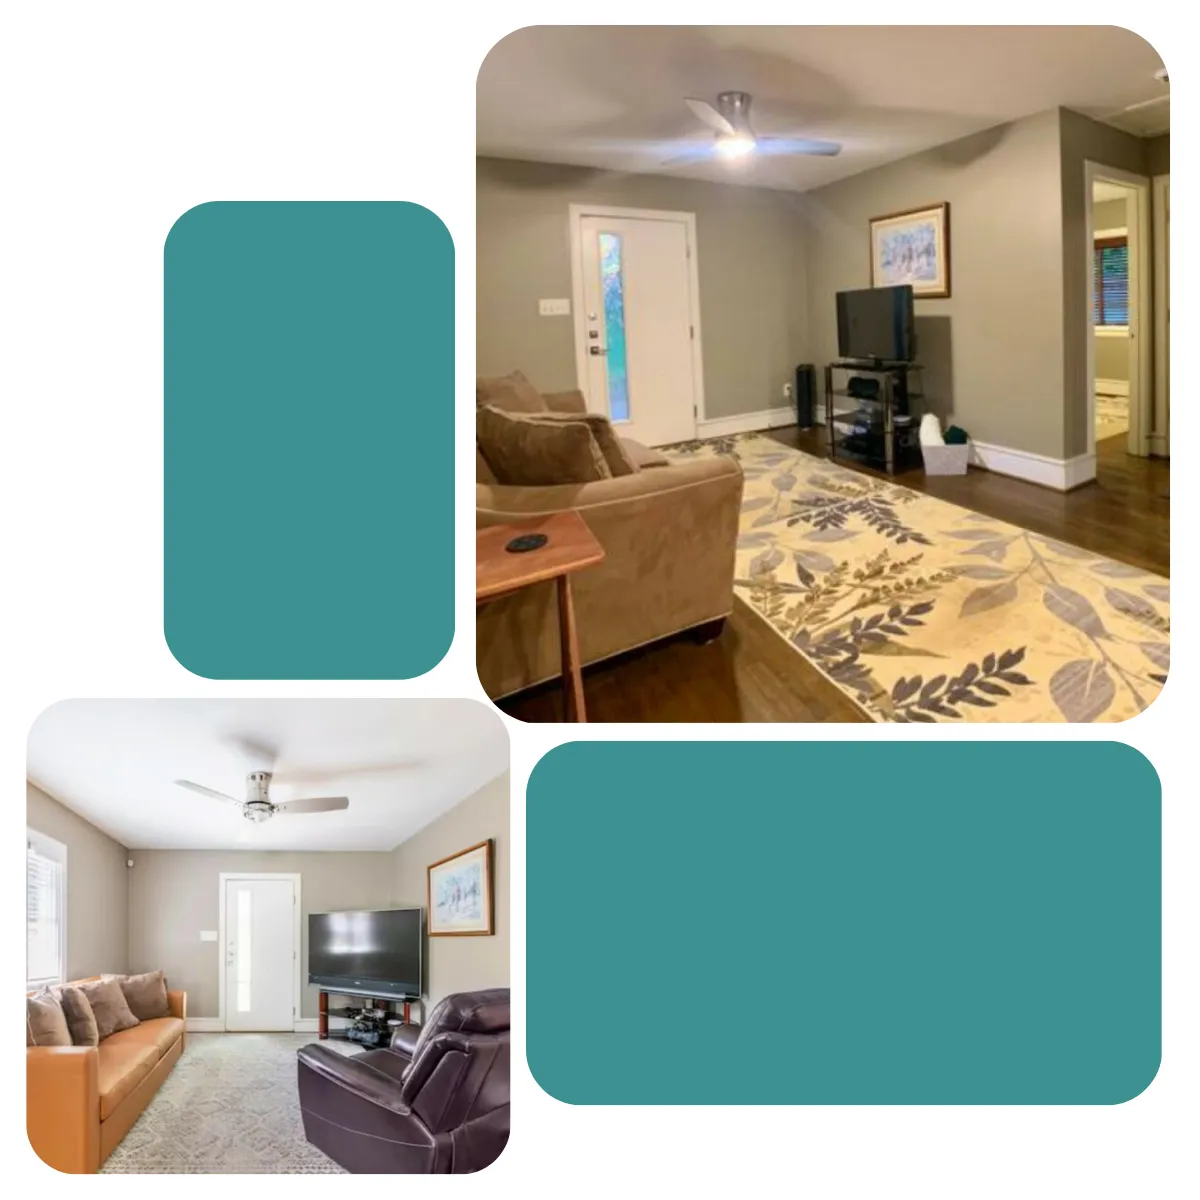 Uptown Cozy Rental offers comfy Queen beds in each bedroom for a good night's sleep, while the soft seats and nice decorations provide a cozy atmosphere for chilling with friends.